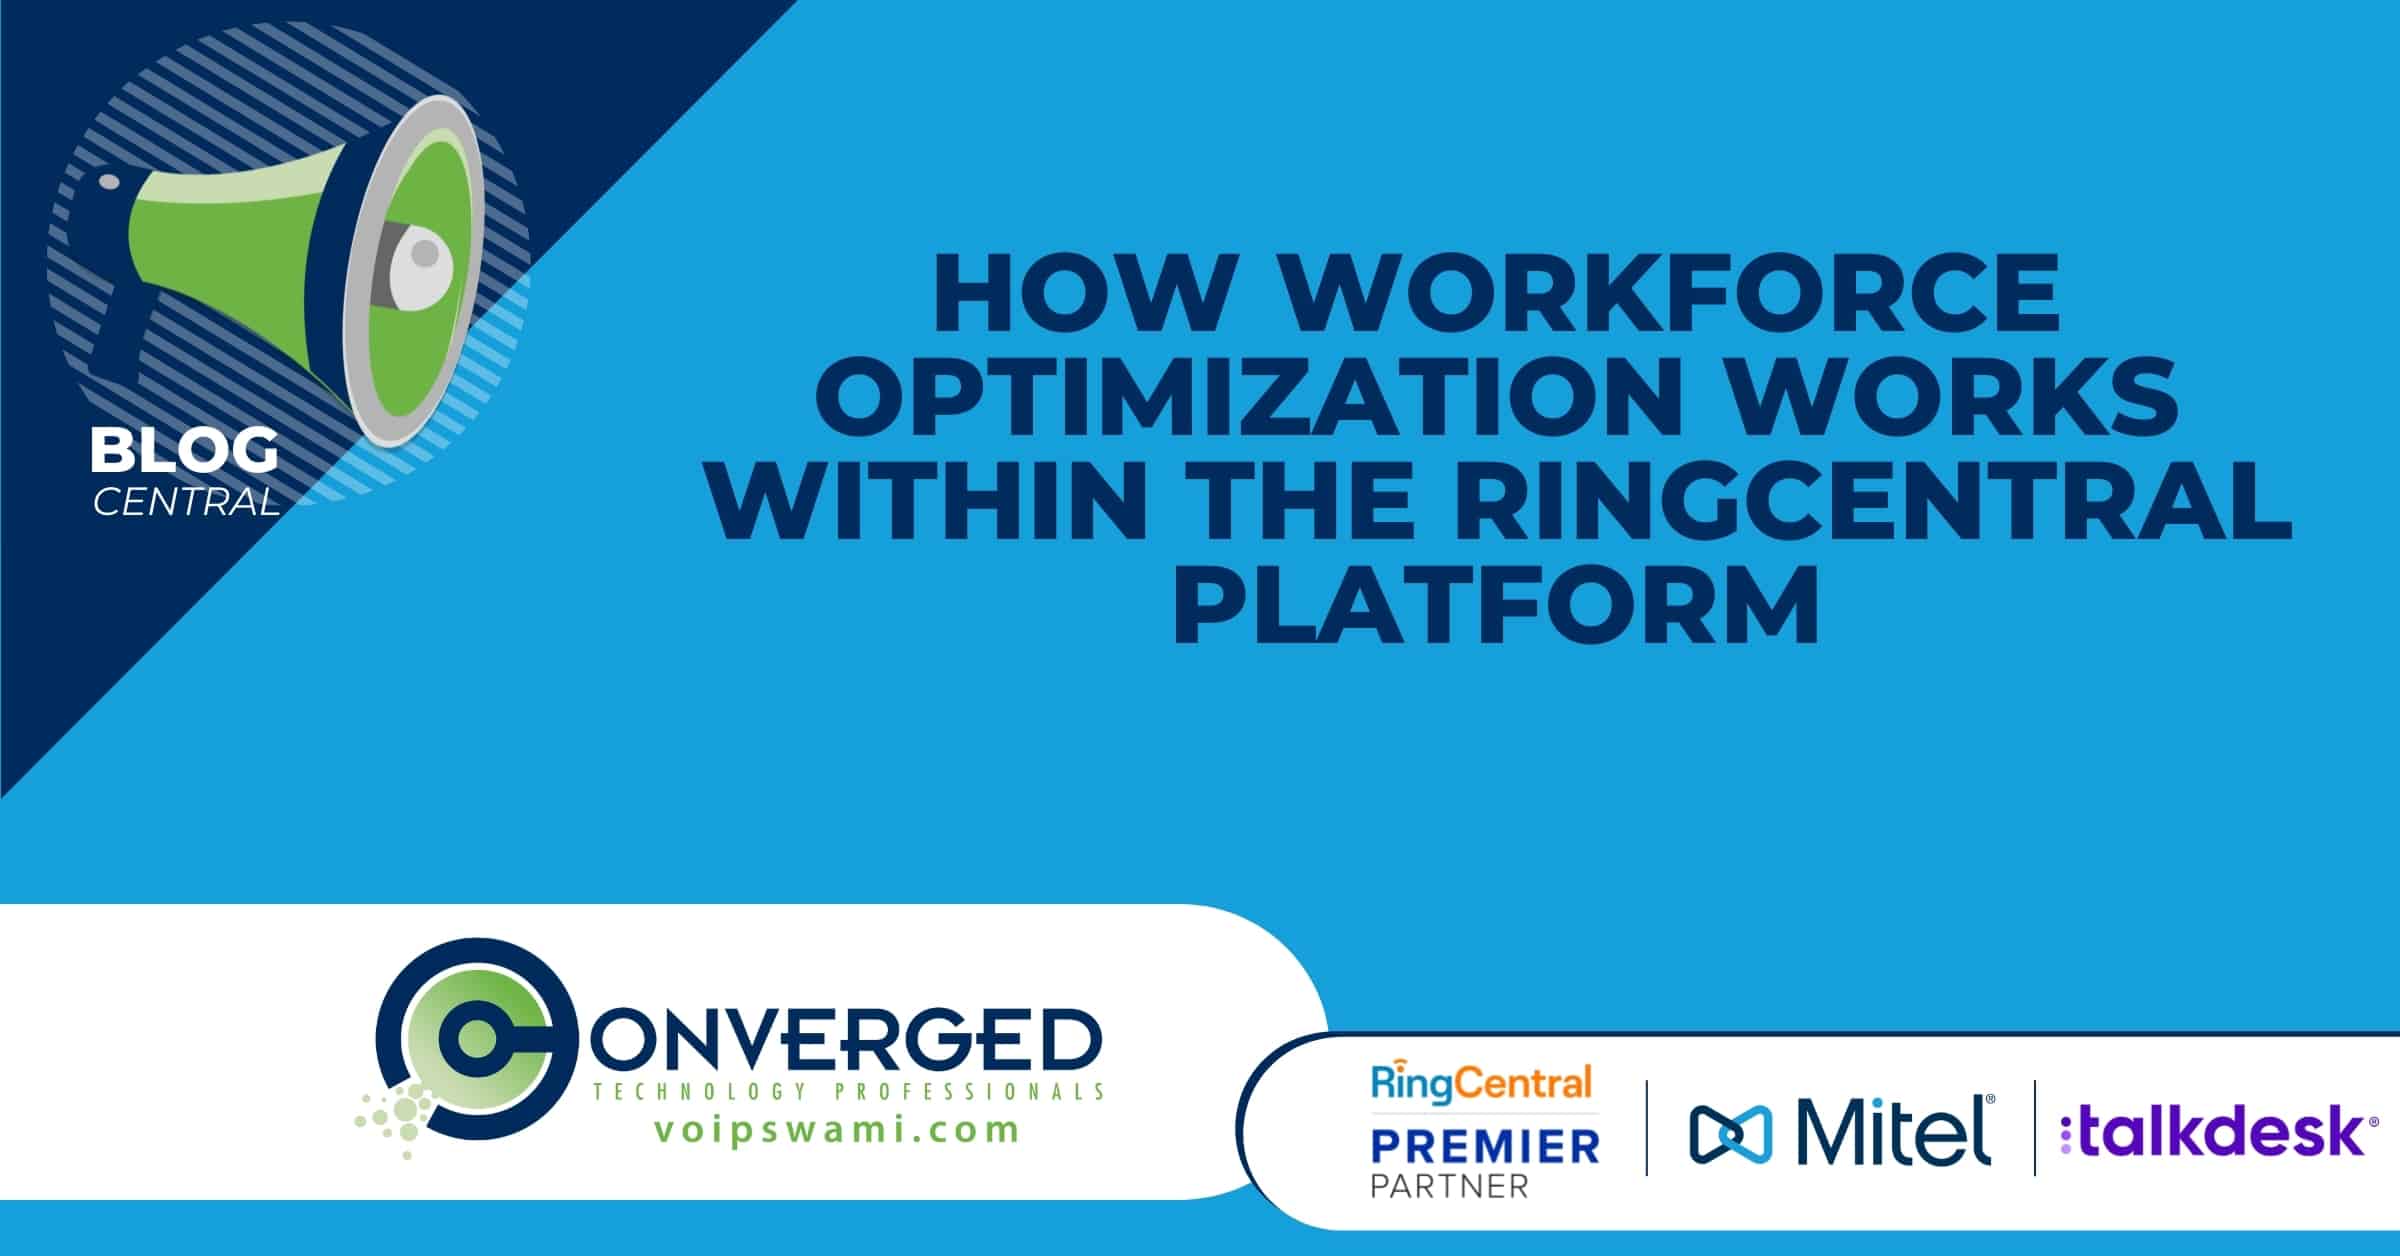 How Workforce Optimization Works Within the RingCentral Platform